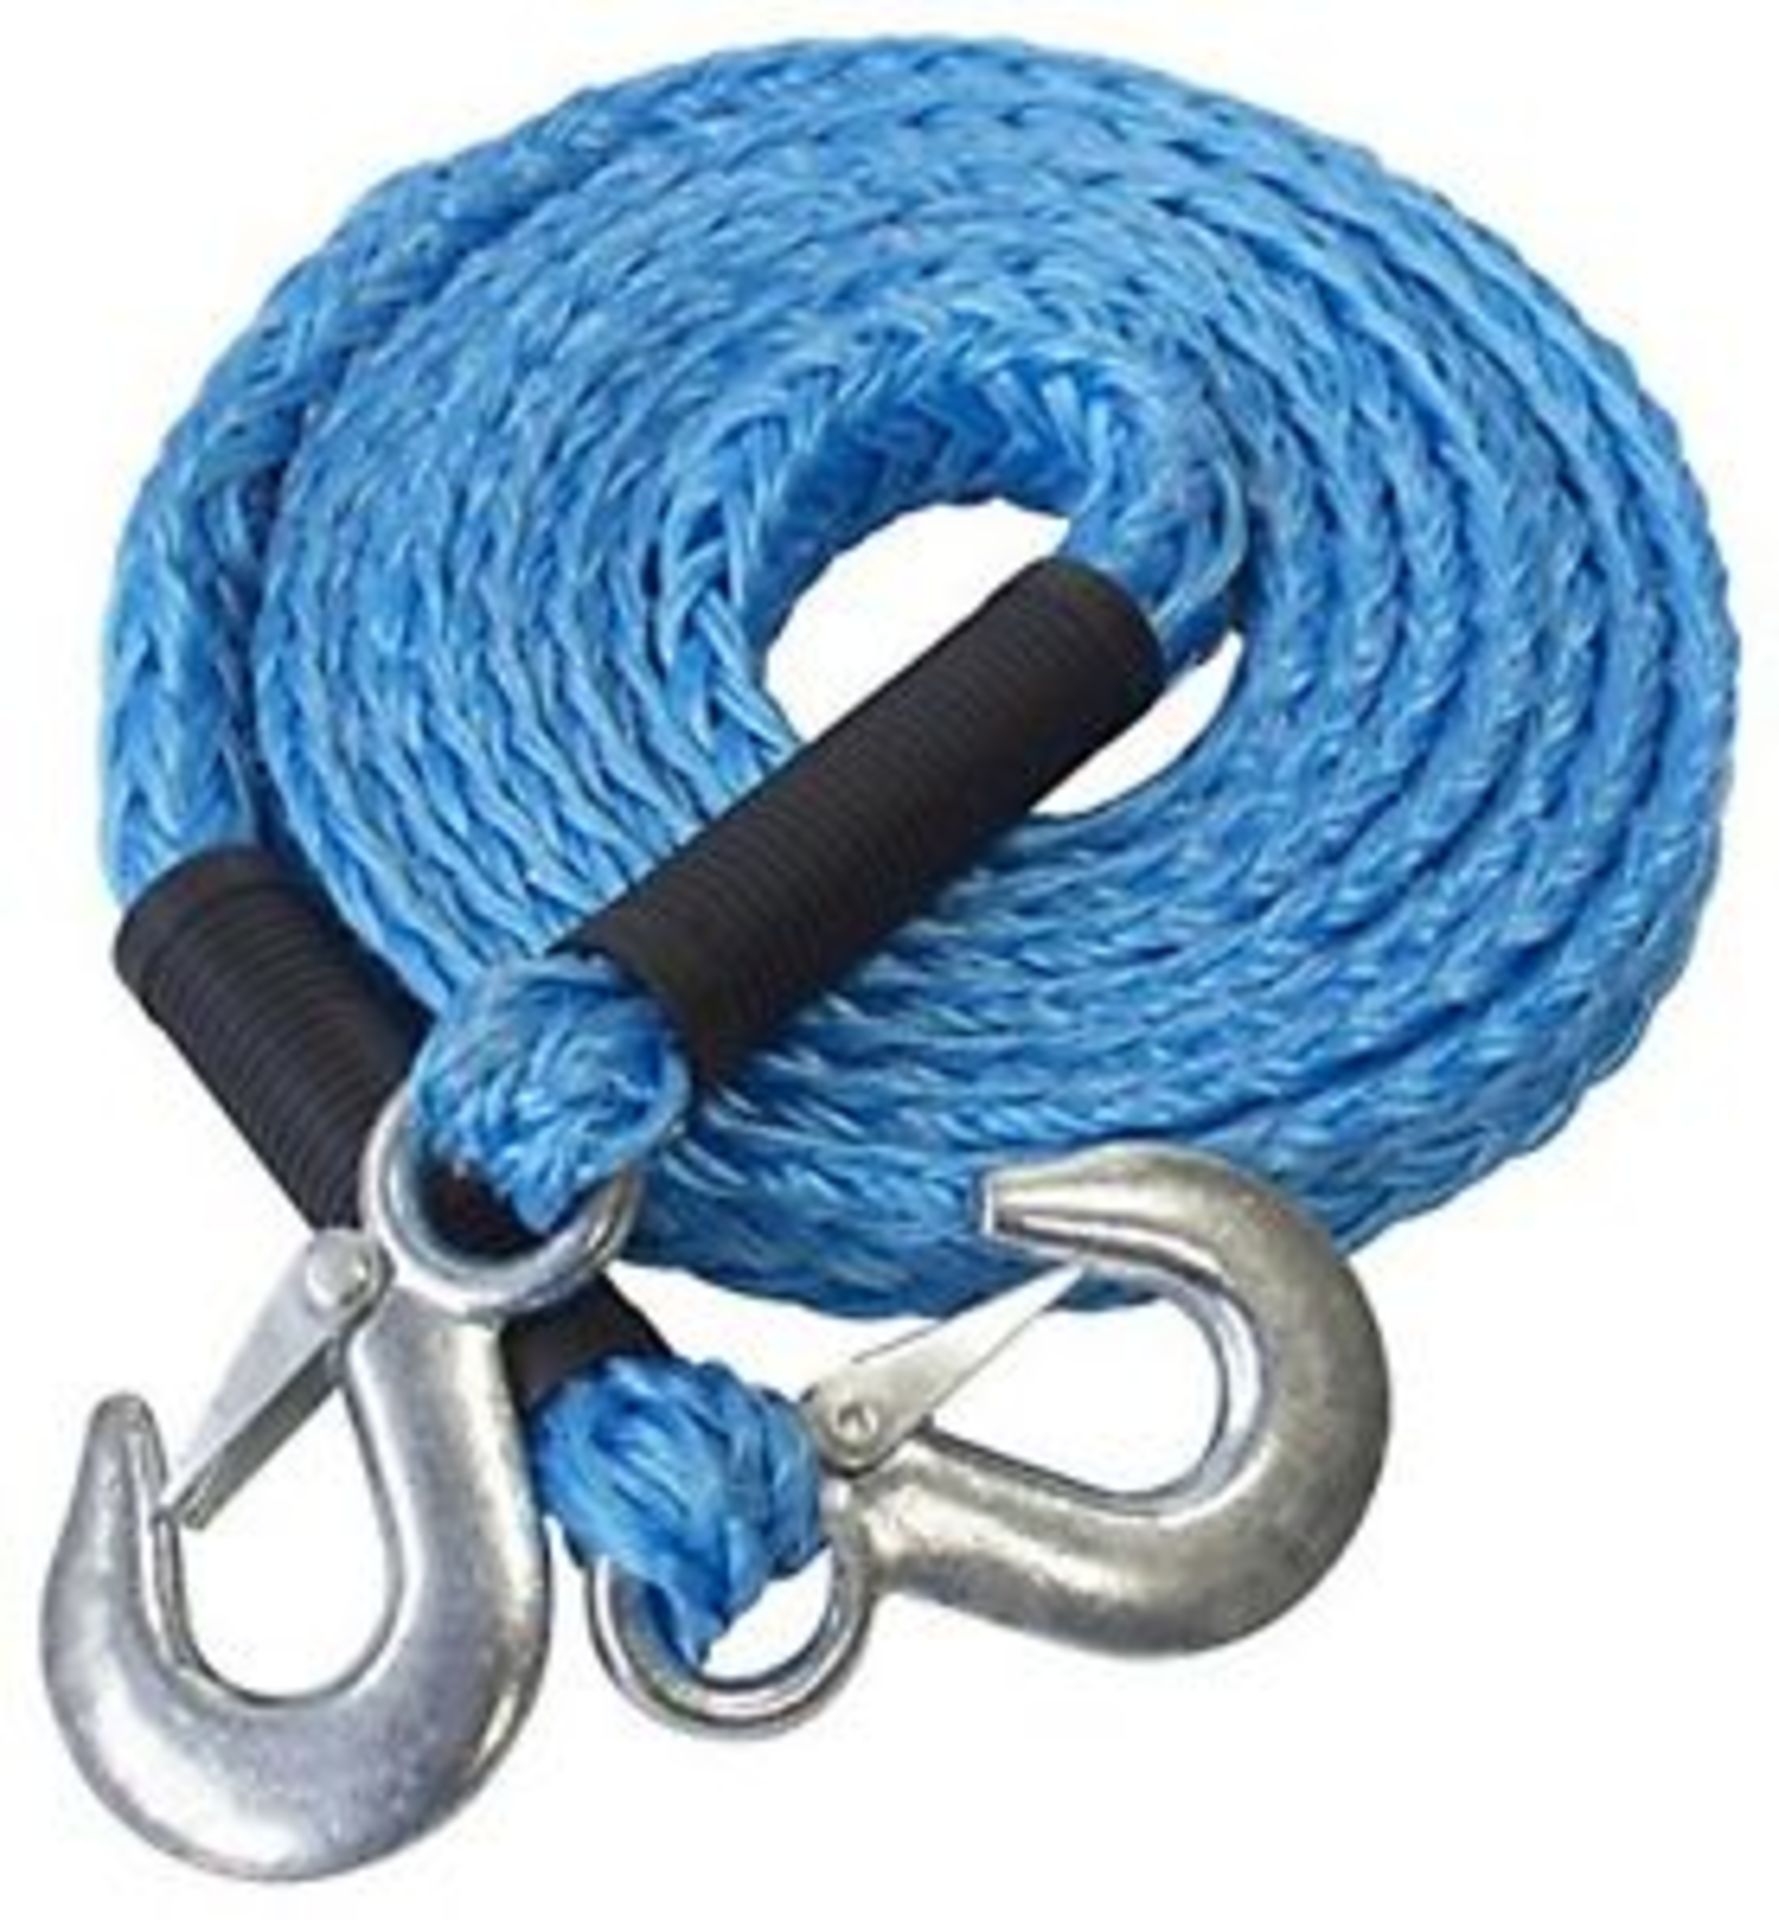 + VAT Brand New Four Metre Tow Rope With Shackle Hooks - Extremely Strong Polypropylene Rope - Image 2 of 2